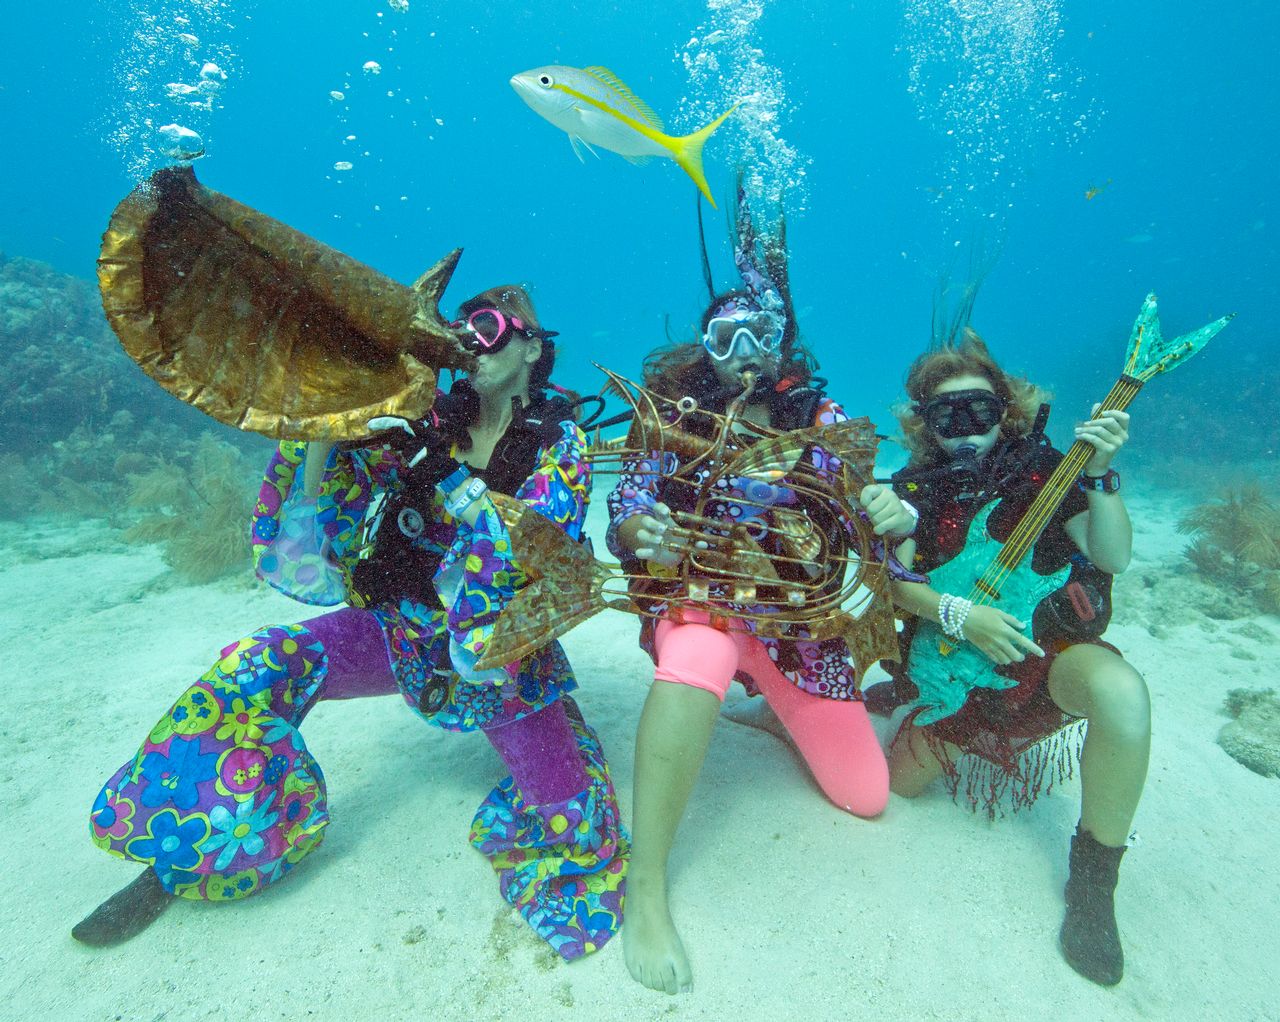 Costumed characters pretending to play musical instruments underwater seemingly play along to music piped underwater during the annual event. Photo: Bob Care